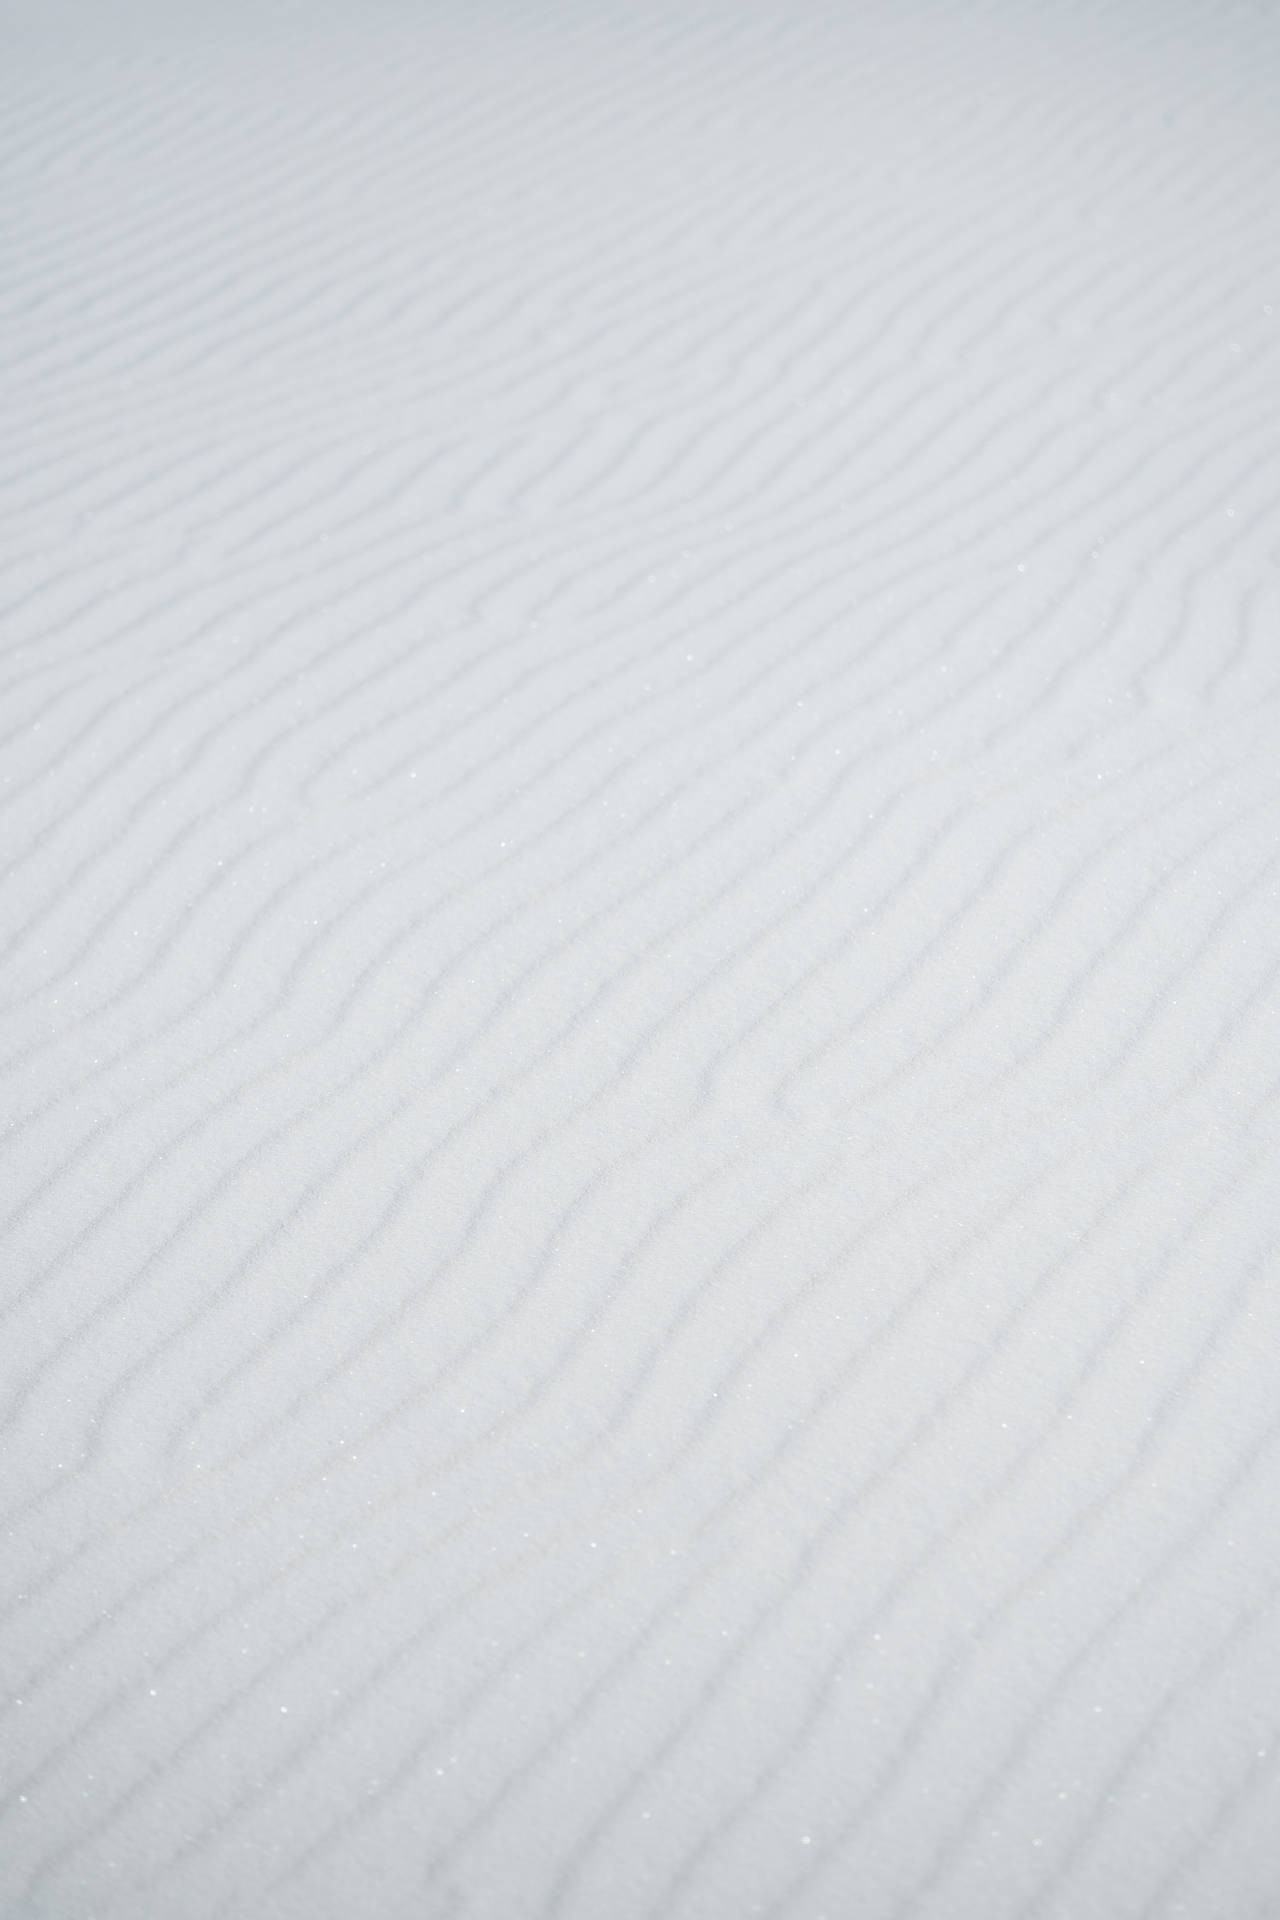 White Screen With Abstract Waves